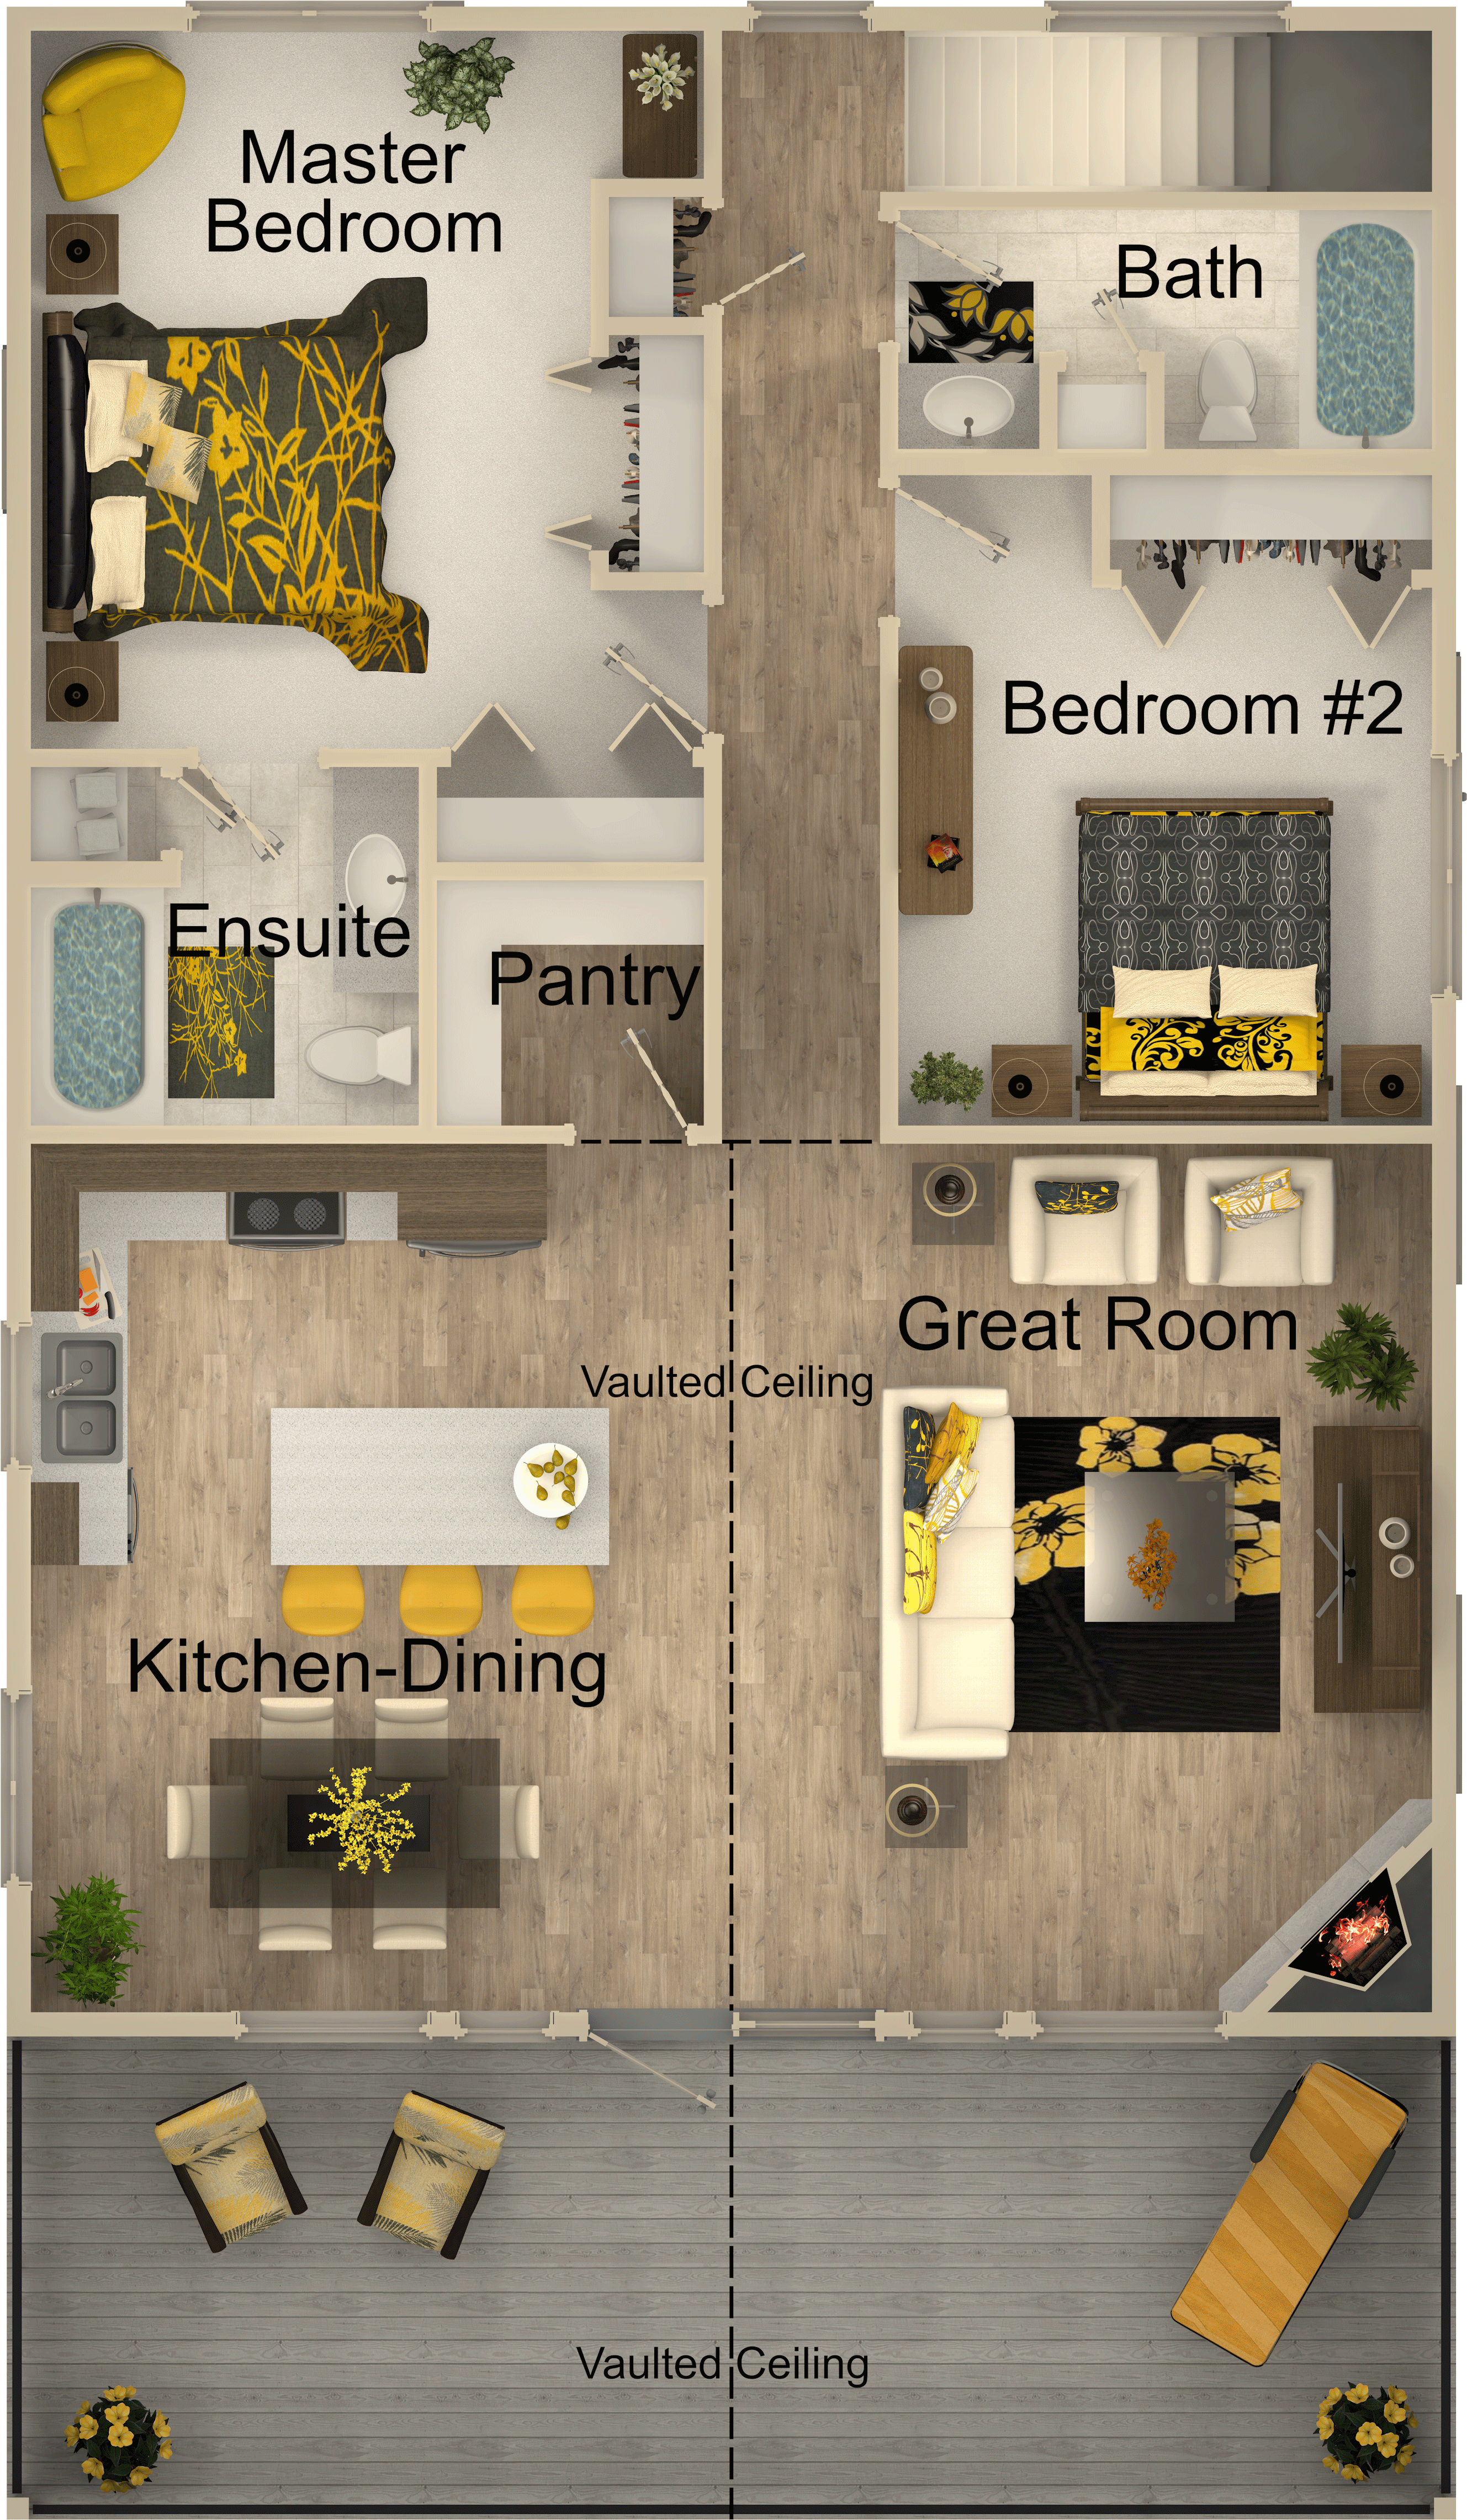 Southport---Plan-(Second-Floor).png